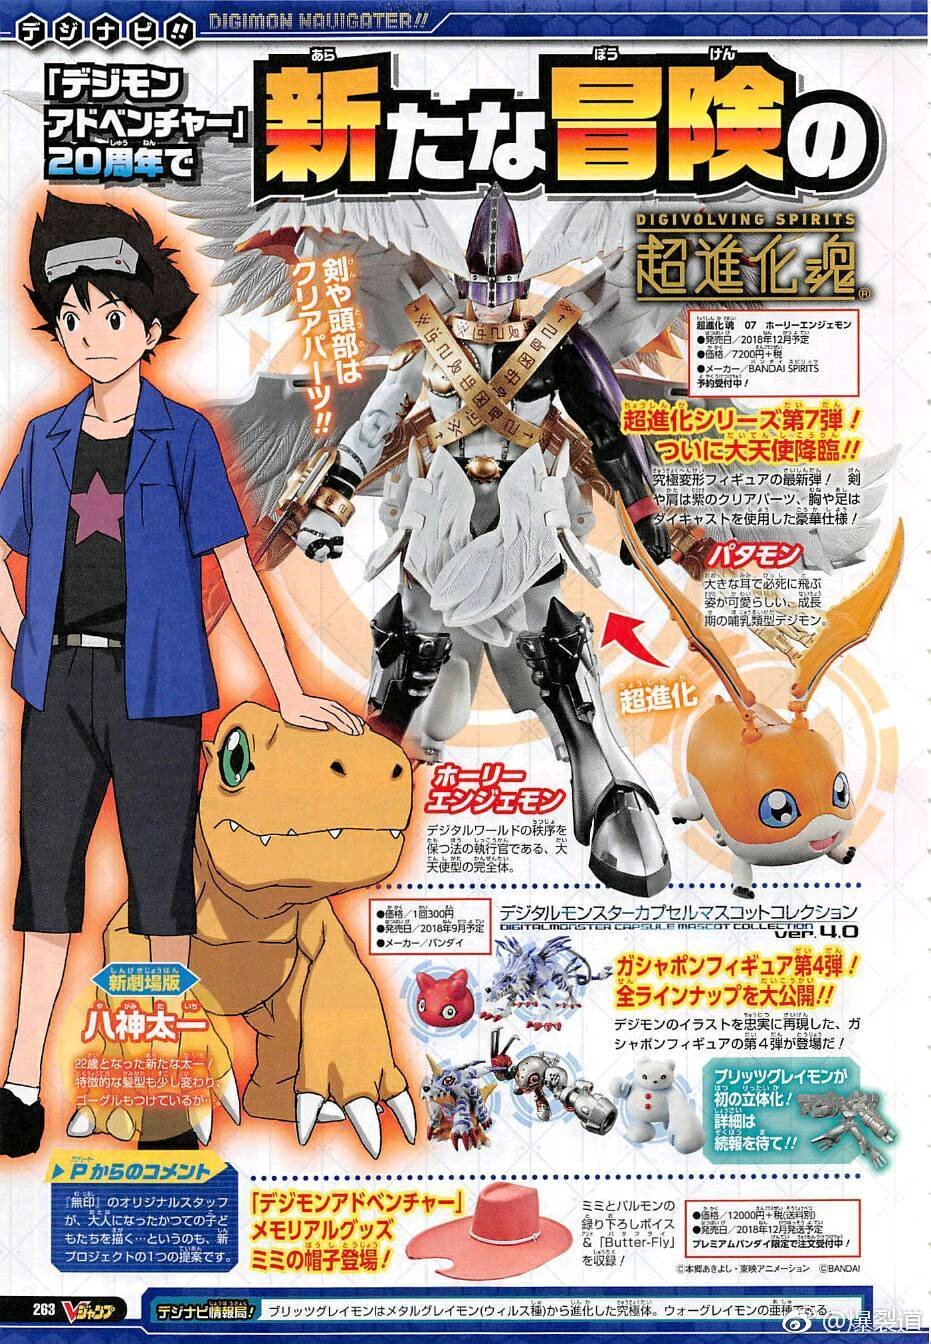 Digimon Masters Introduces Lucemon – Capsule Computers